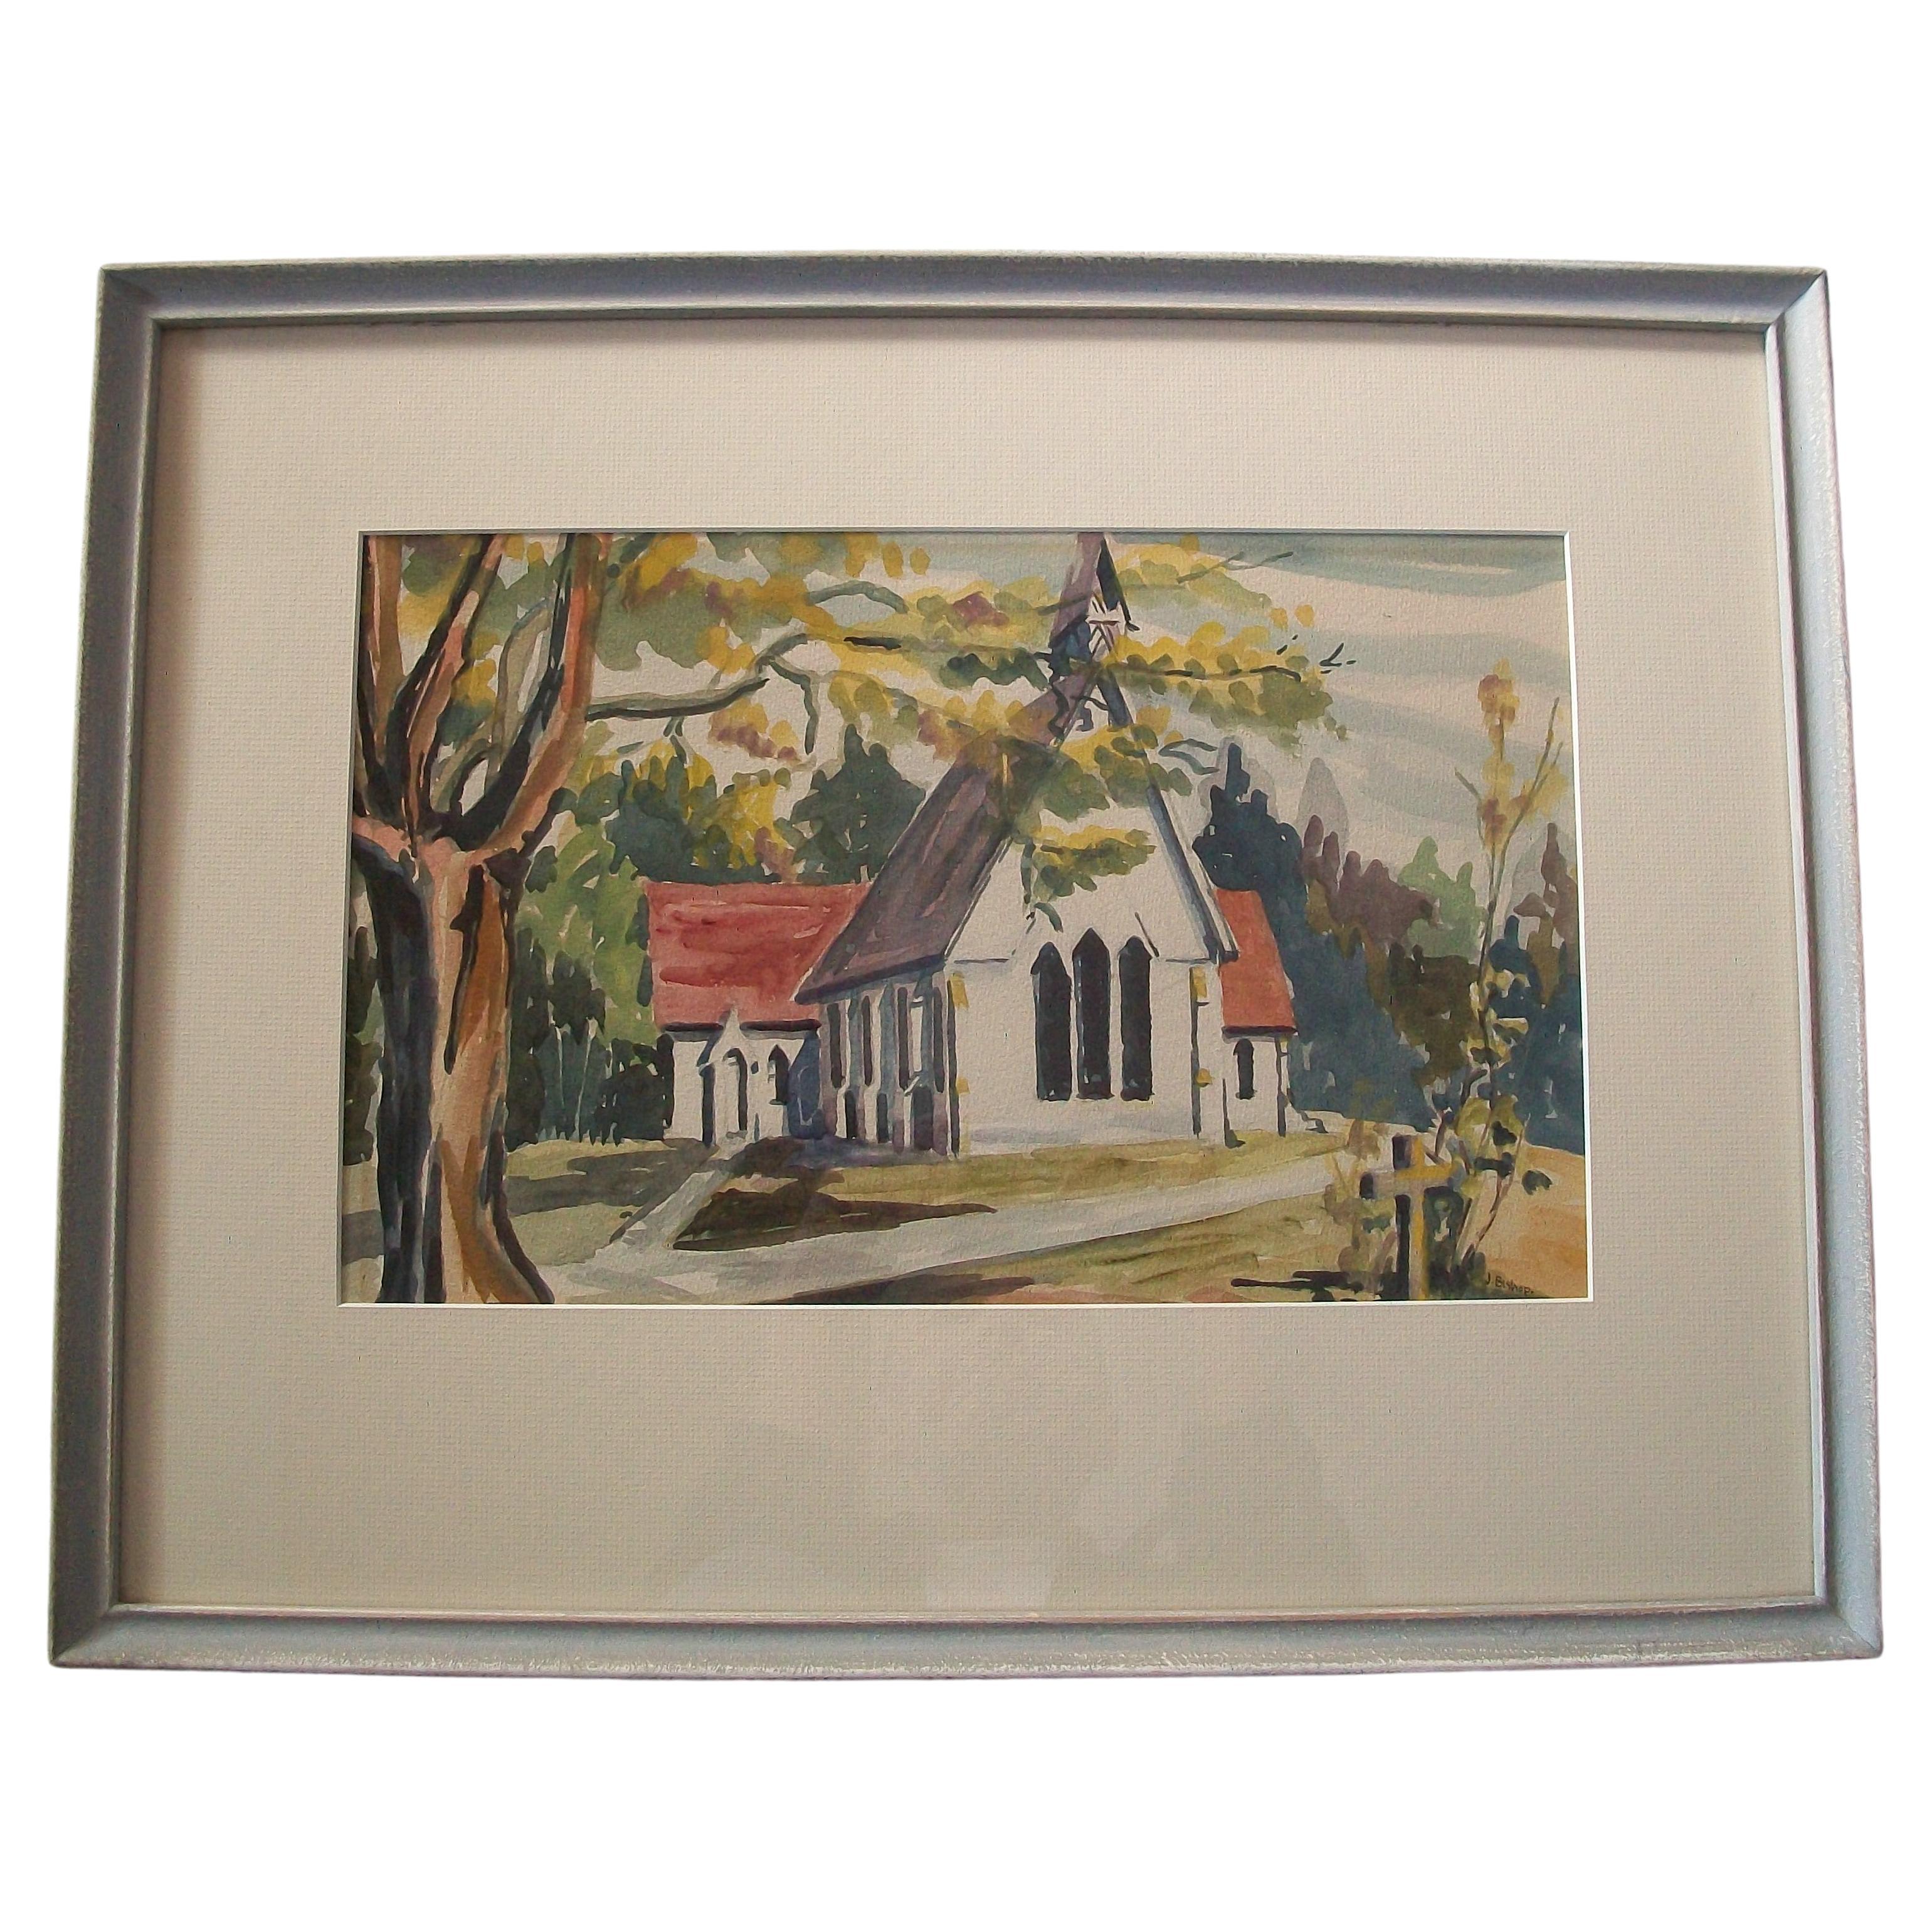 J. BISHOP - 'Untitled' - Vintage Watercolor Painting - Framed - Canada - 20th C. For Sale